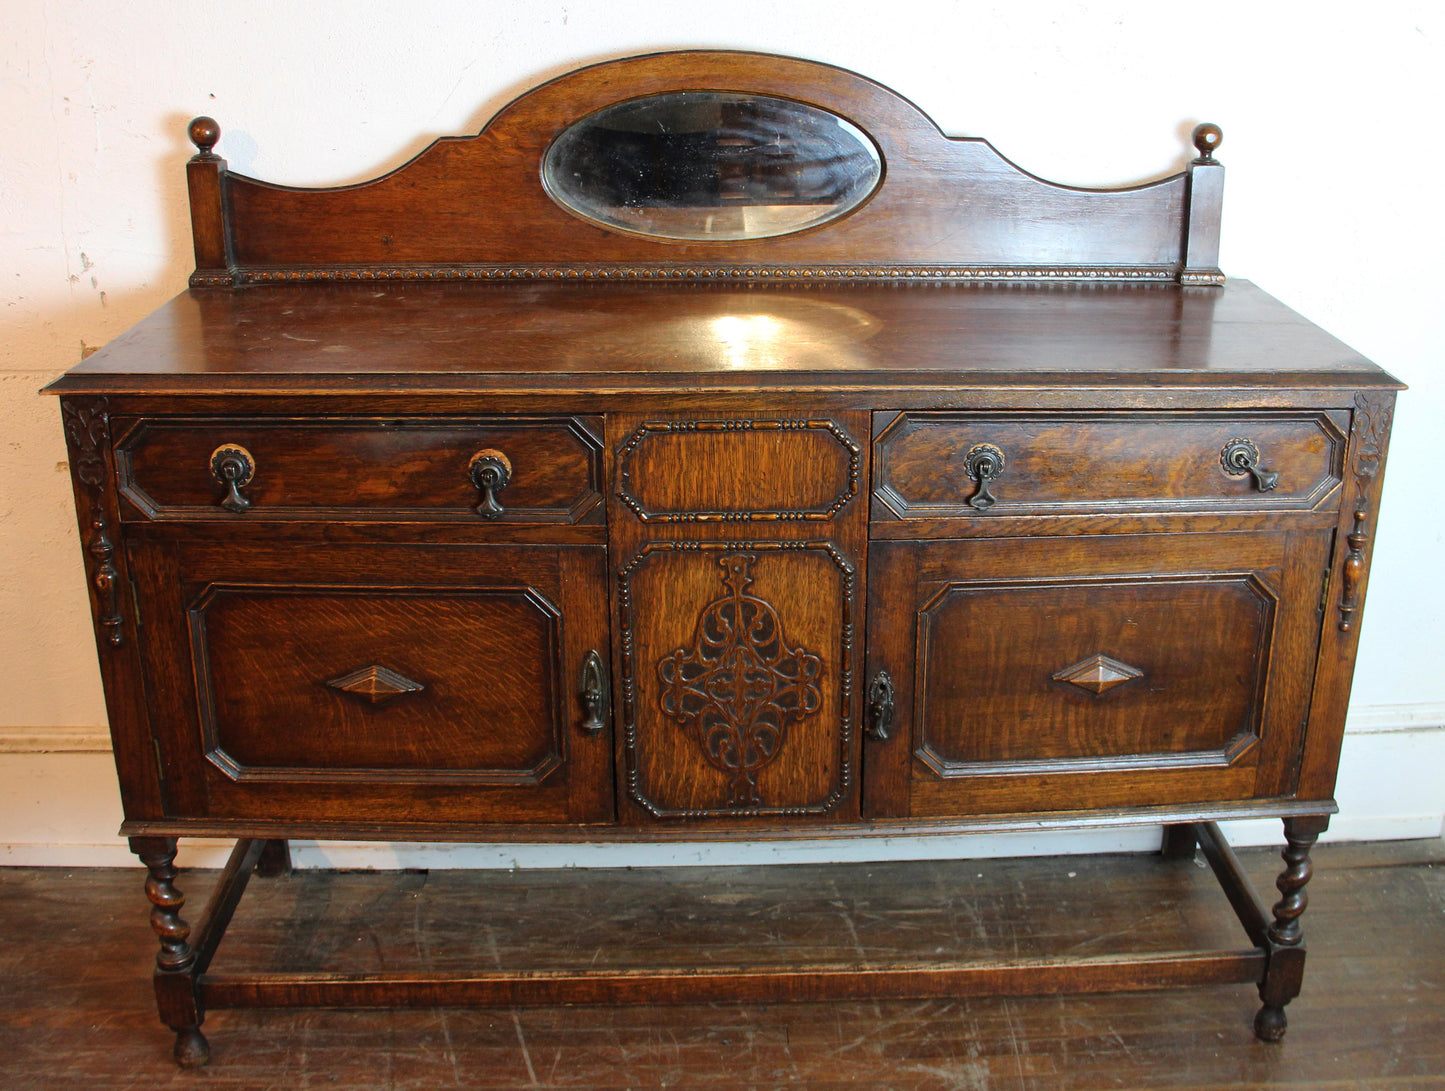 Antique Sideboard with mirror